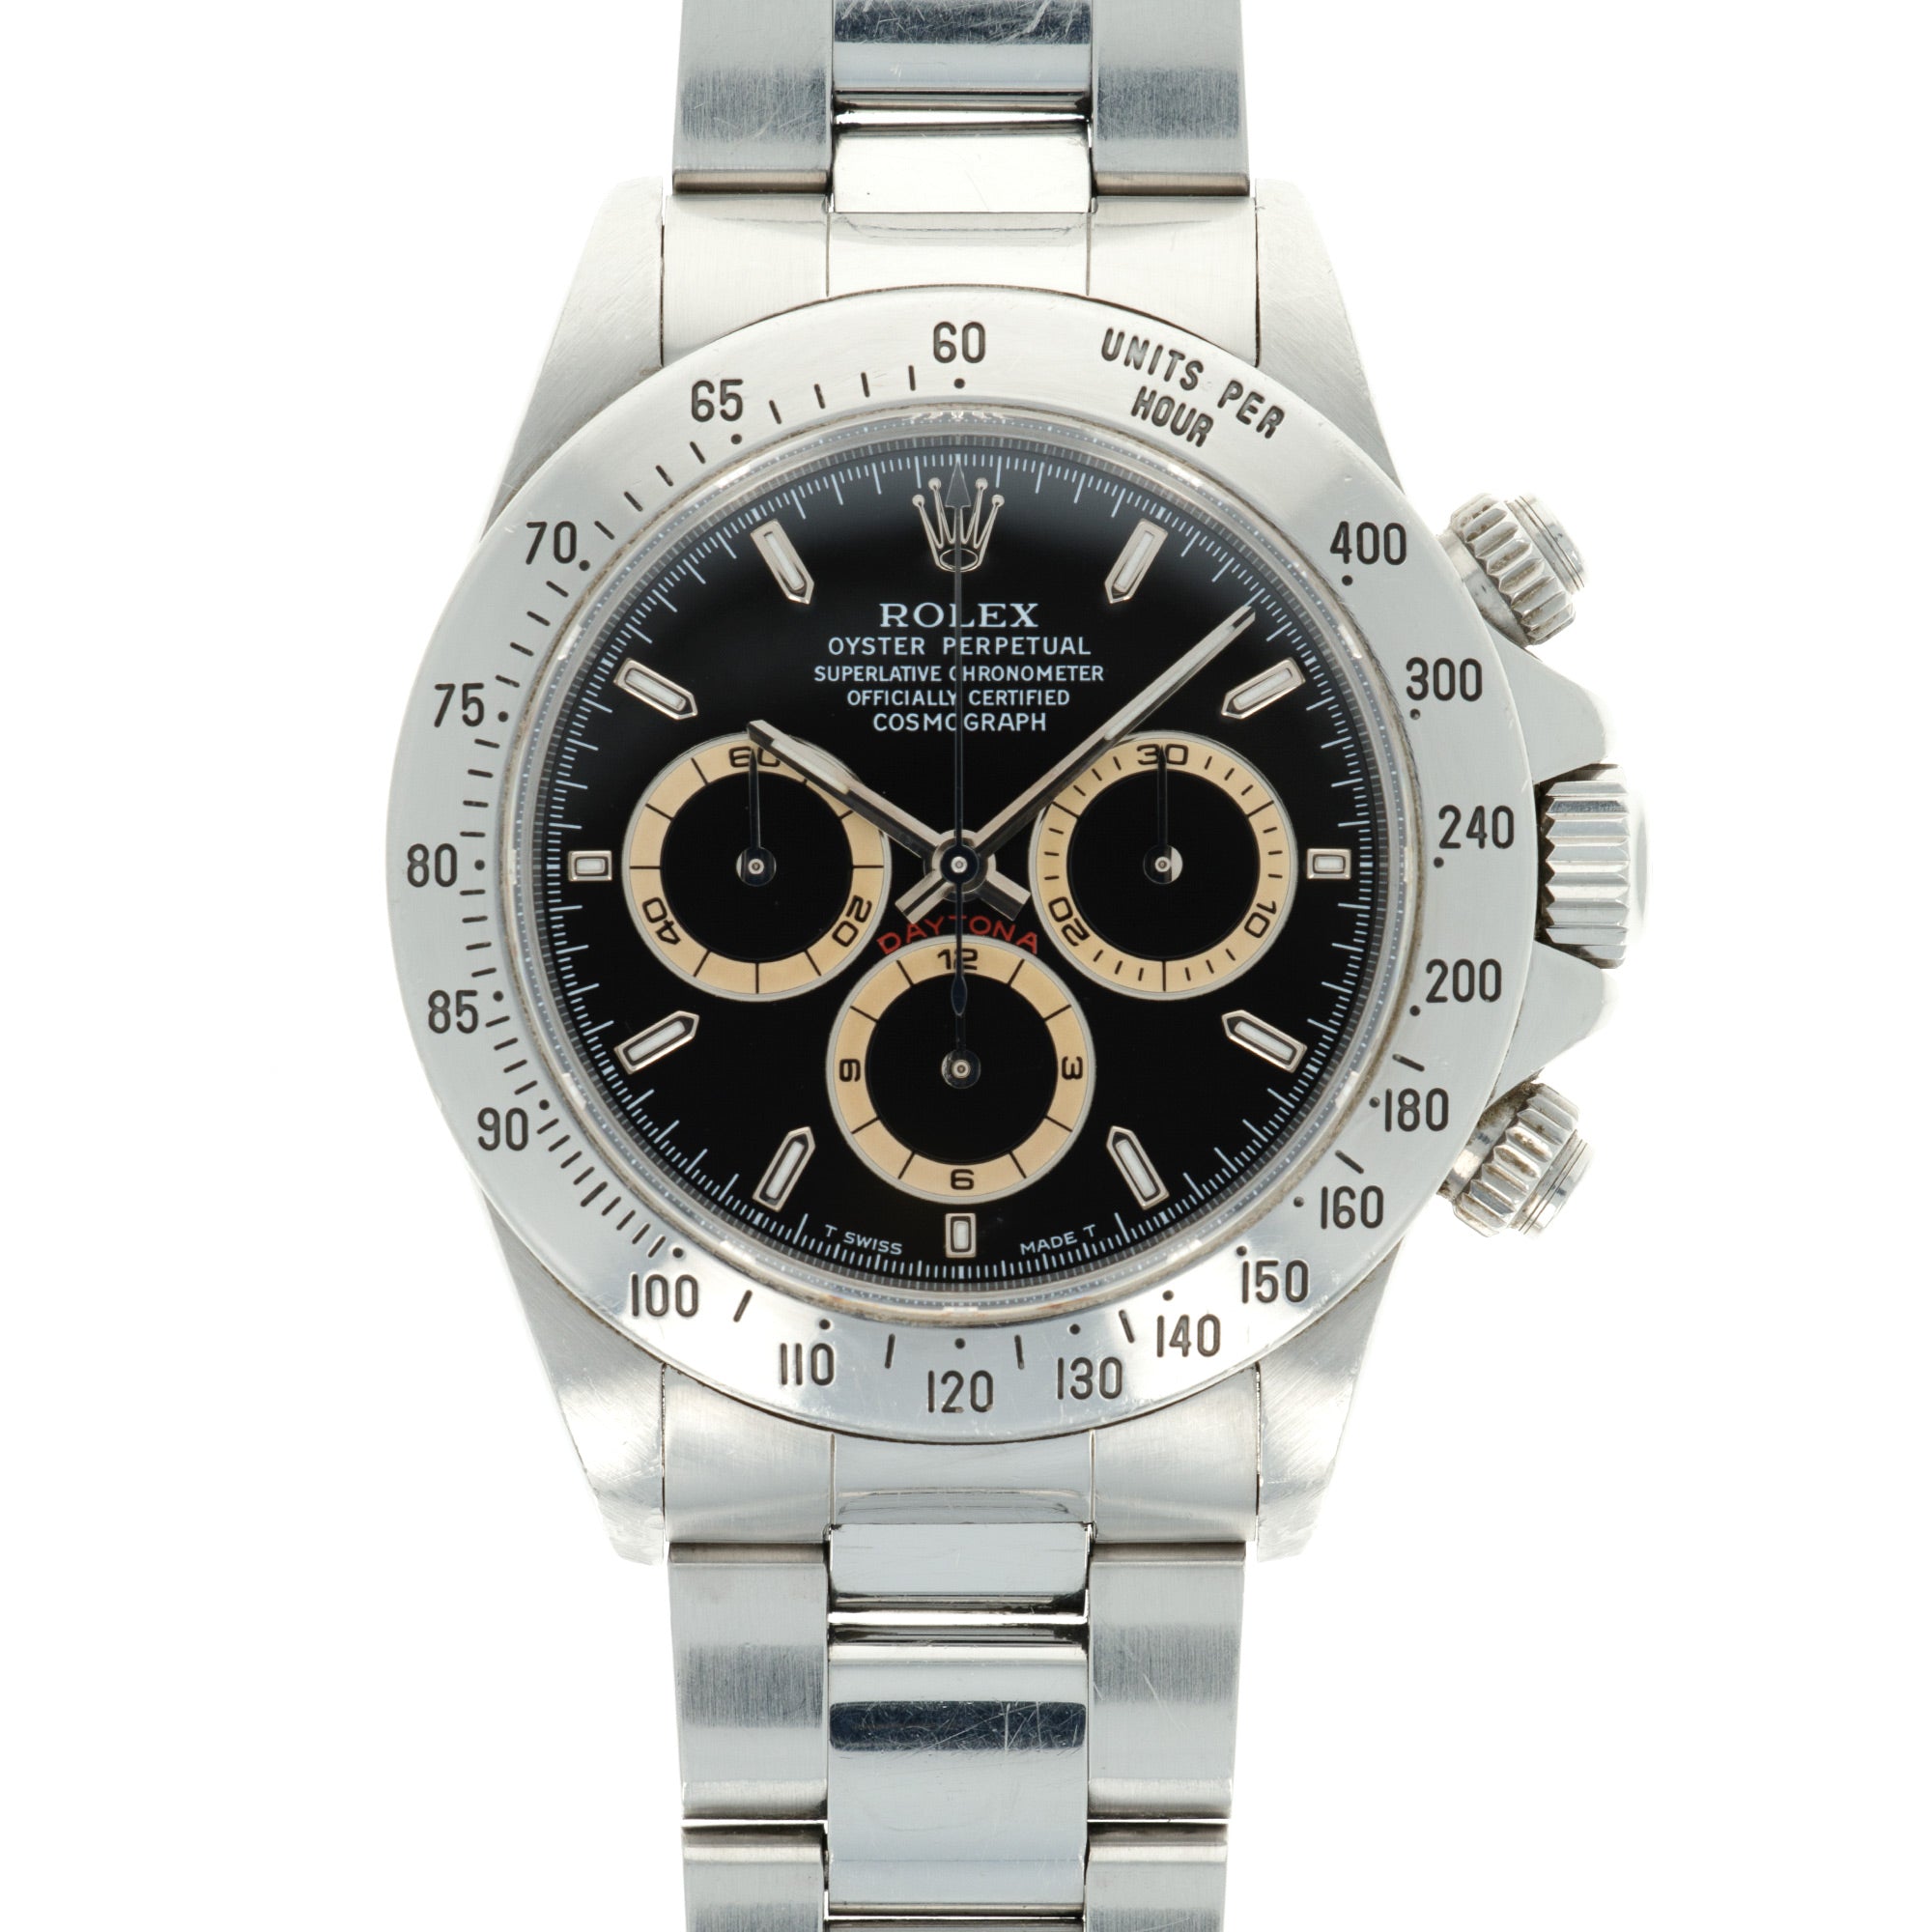 Rolex - Rolex Steel Zenith Daytona Ref. 16520 with Original Papers and Brown Subdials - The Keystone Watches